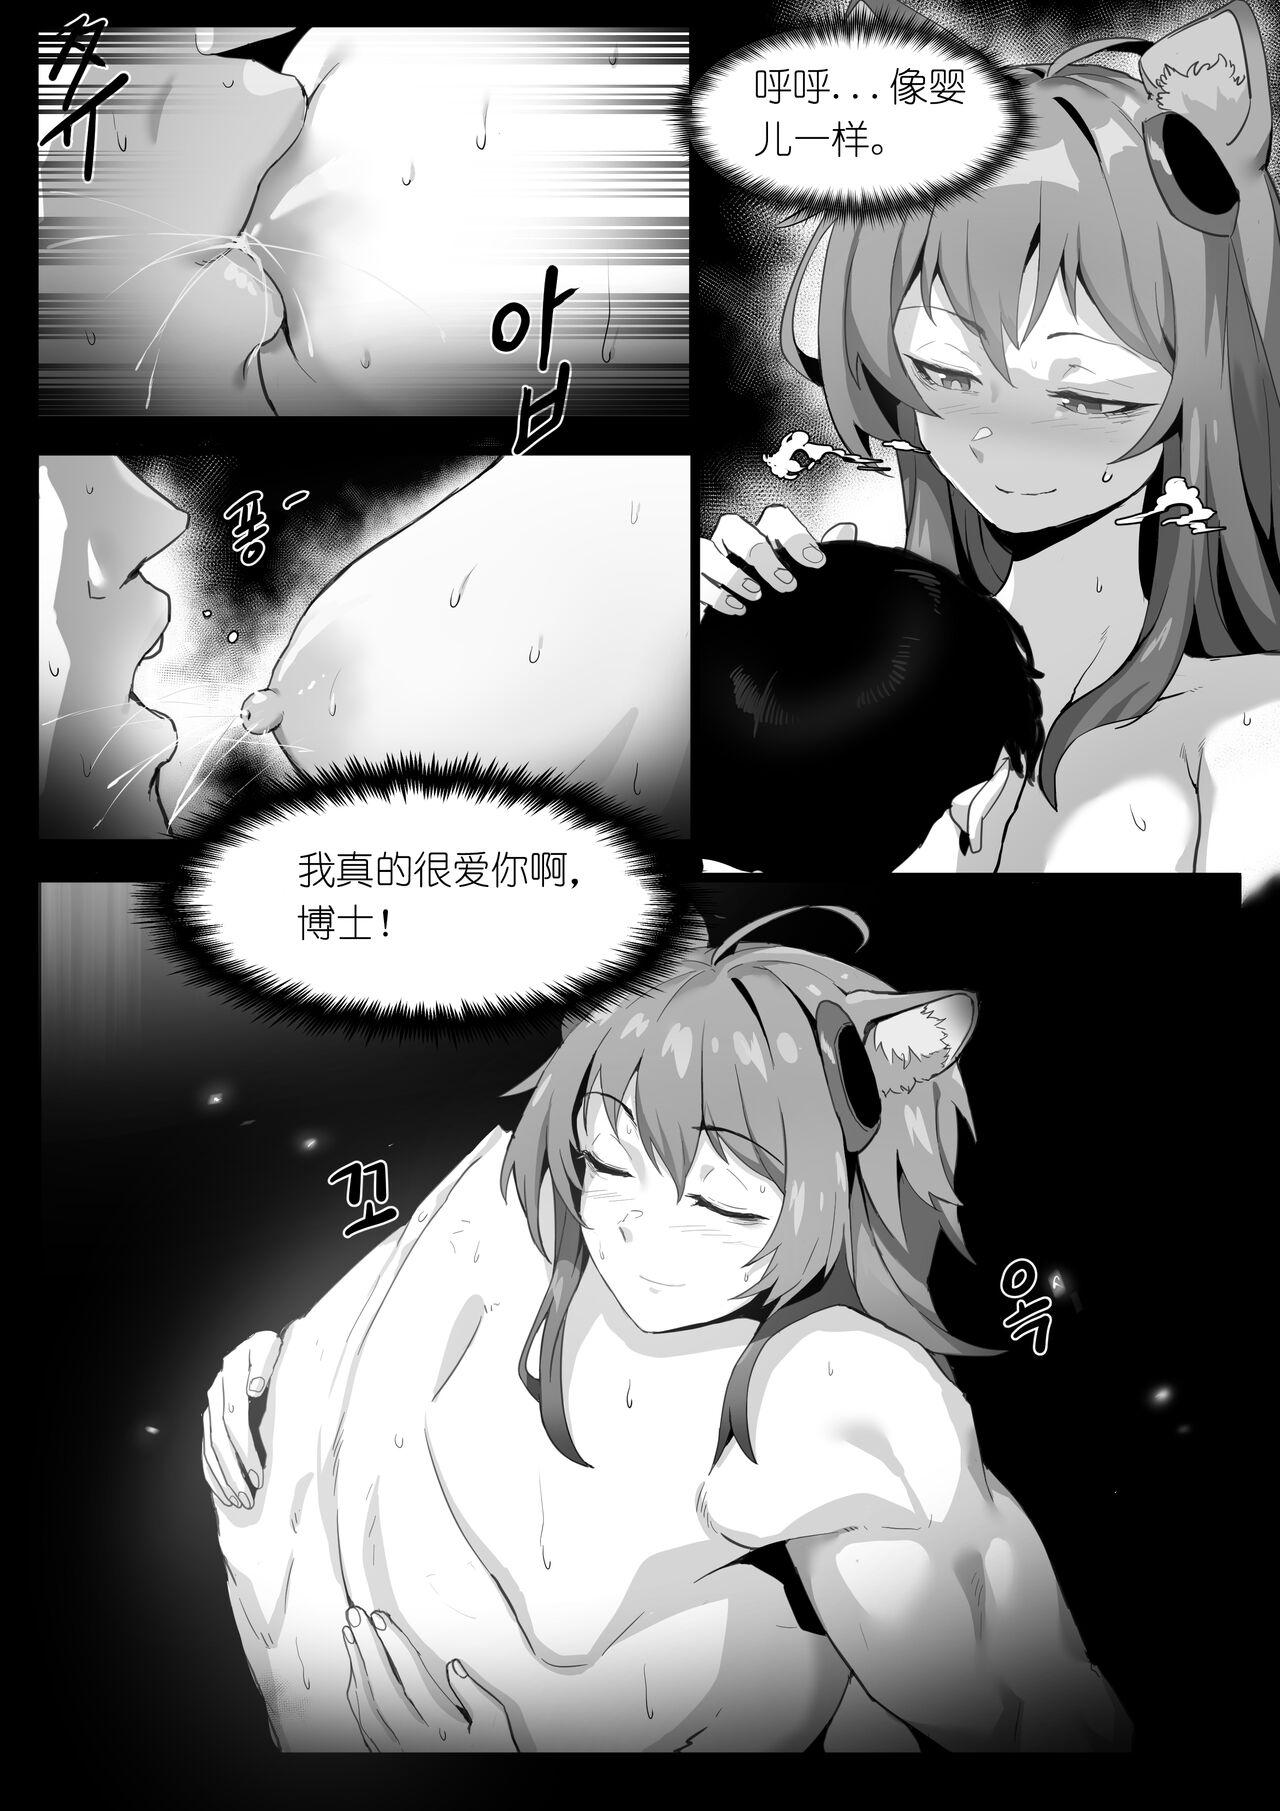 Dicks 欲望方舟记录3 - Arknights Tanned - Page 3